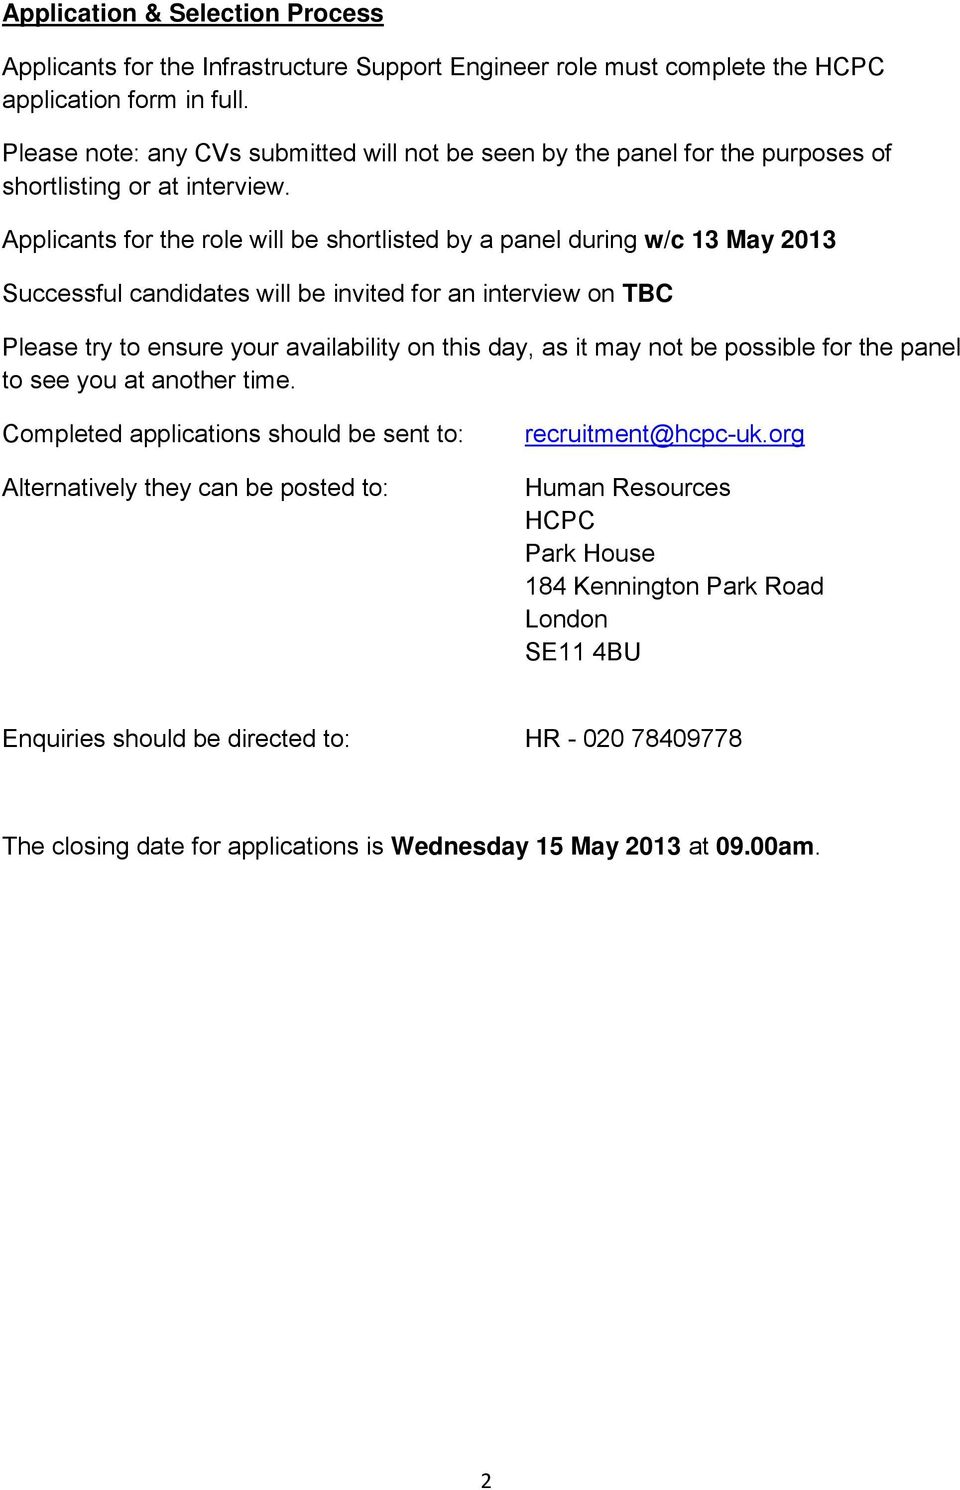 Applicants for the role will be shortlisted by a panel during w/c 13 May 2013 Successful candidates will be invited for an interview on TBC Please try to ensure your availability on this day, as it